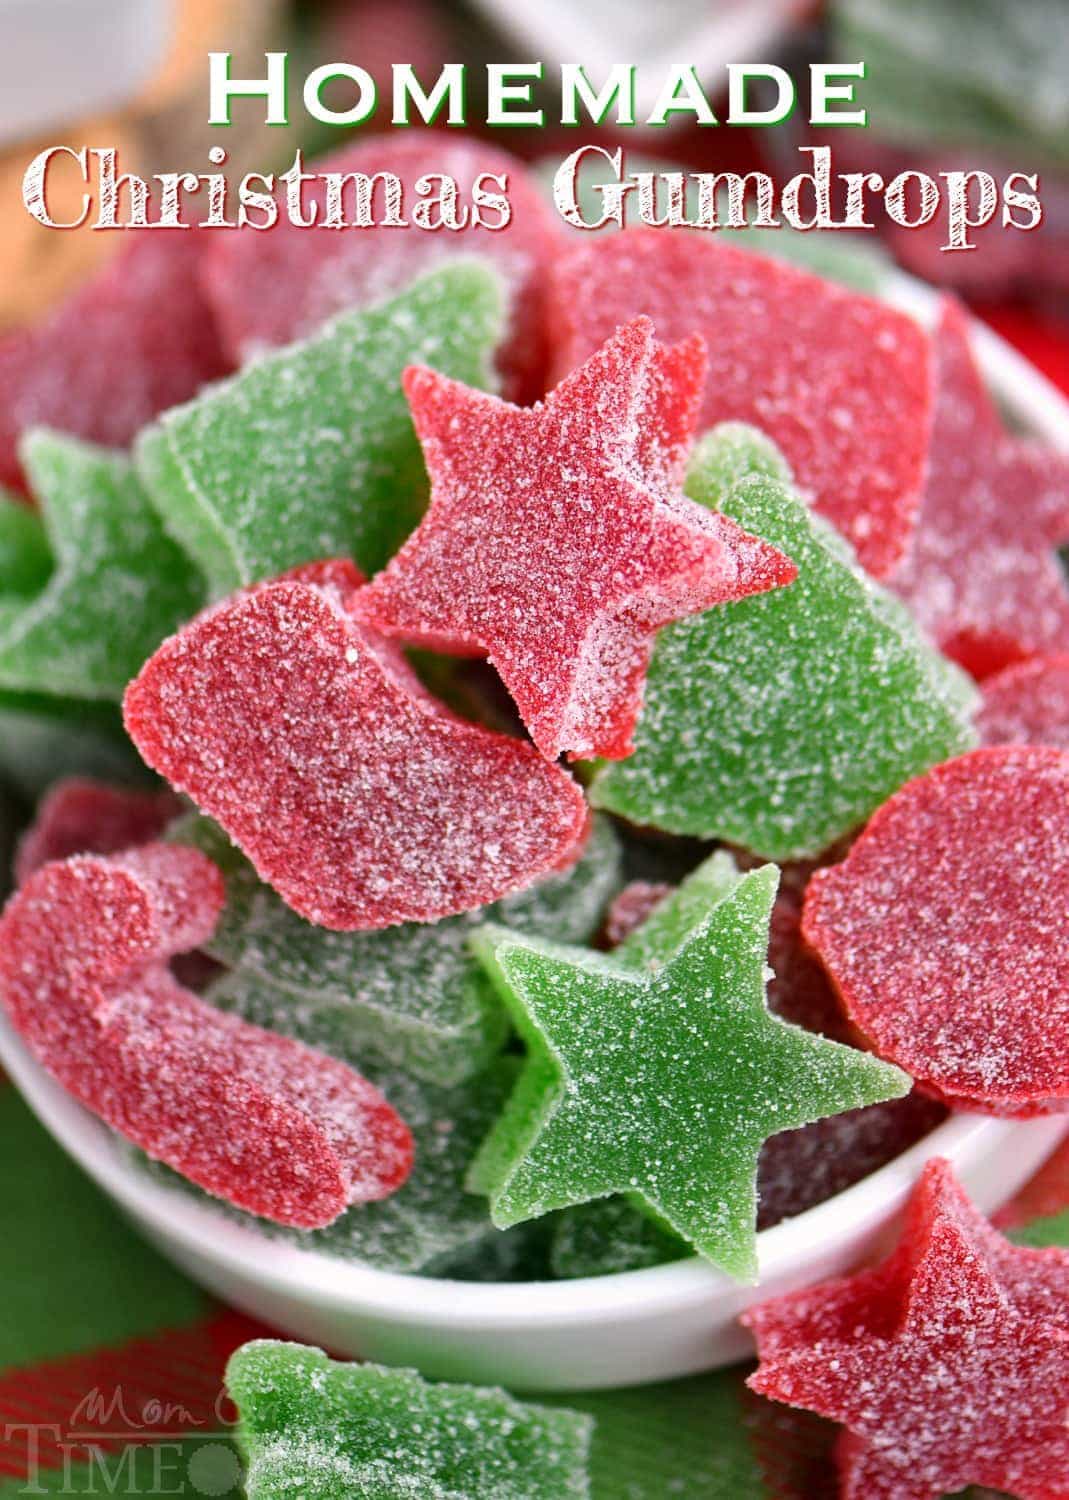 12 (More!) Delicious Christmas Candies to Make | Random Acts of Baking